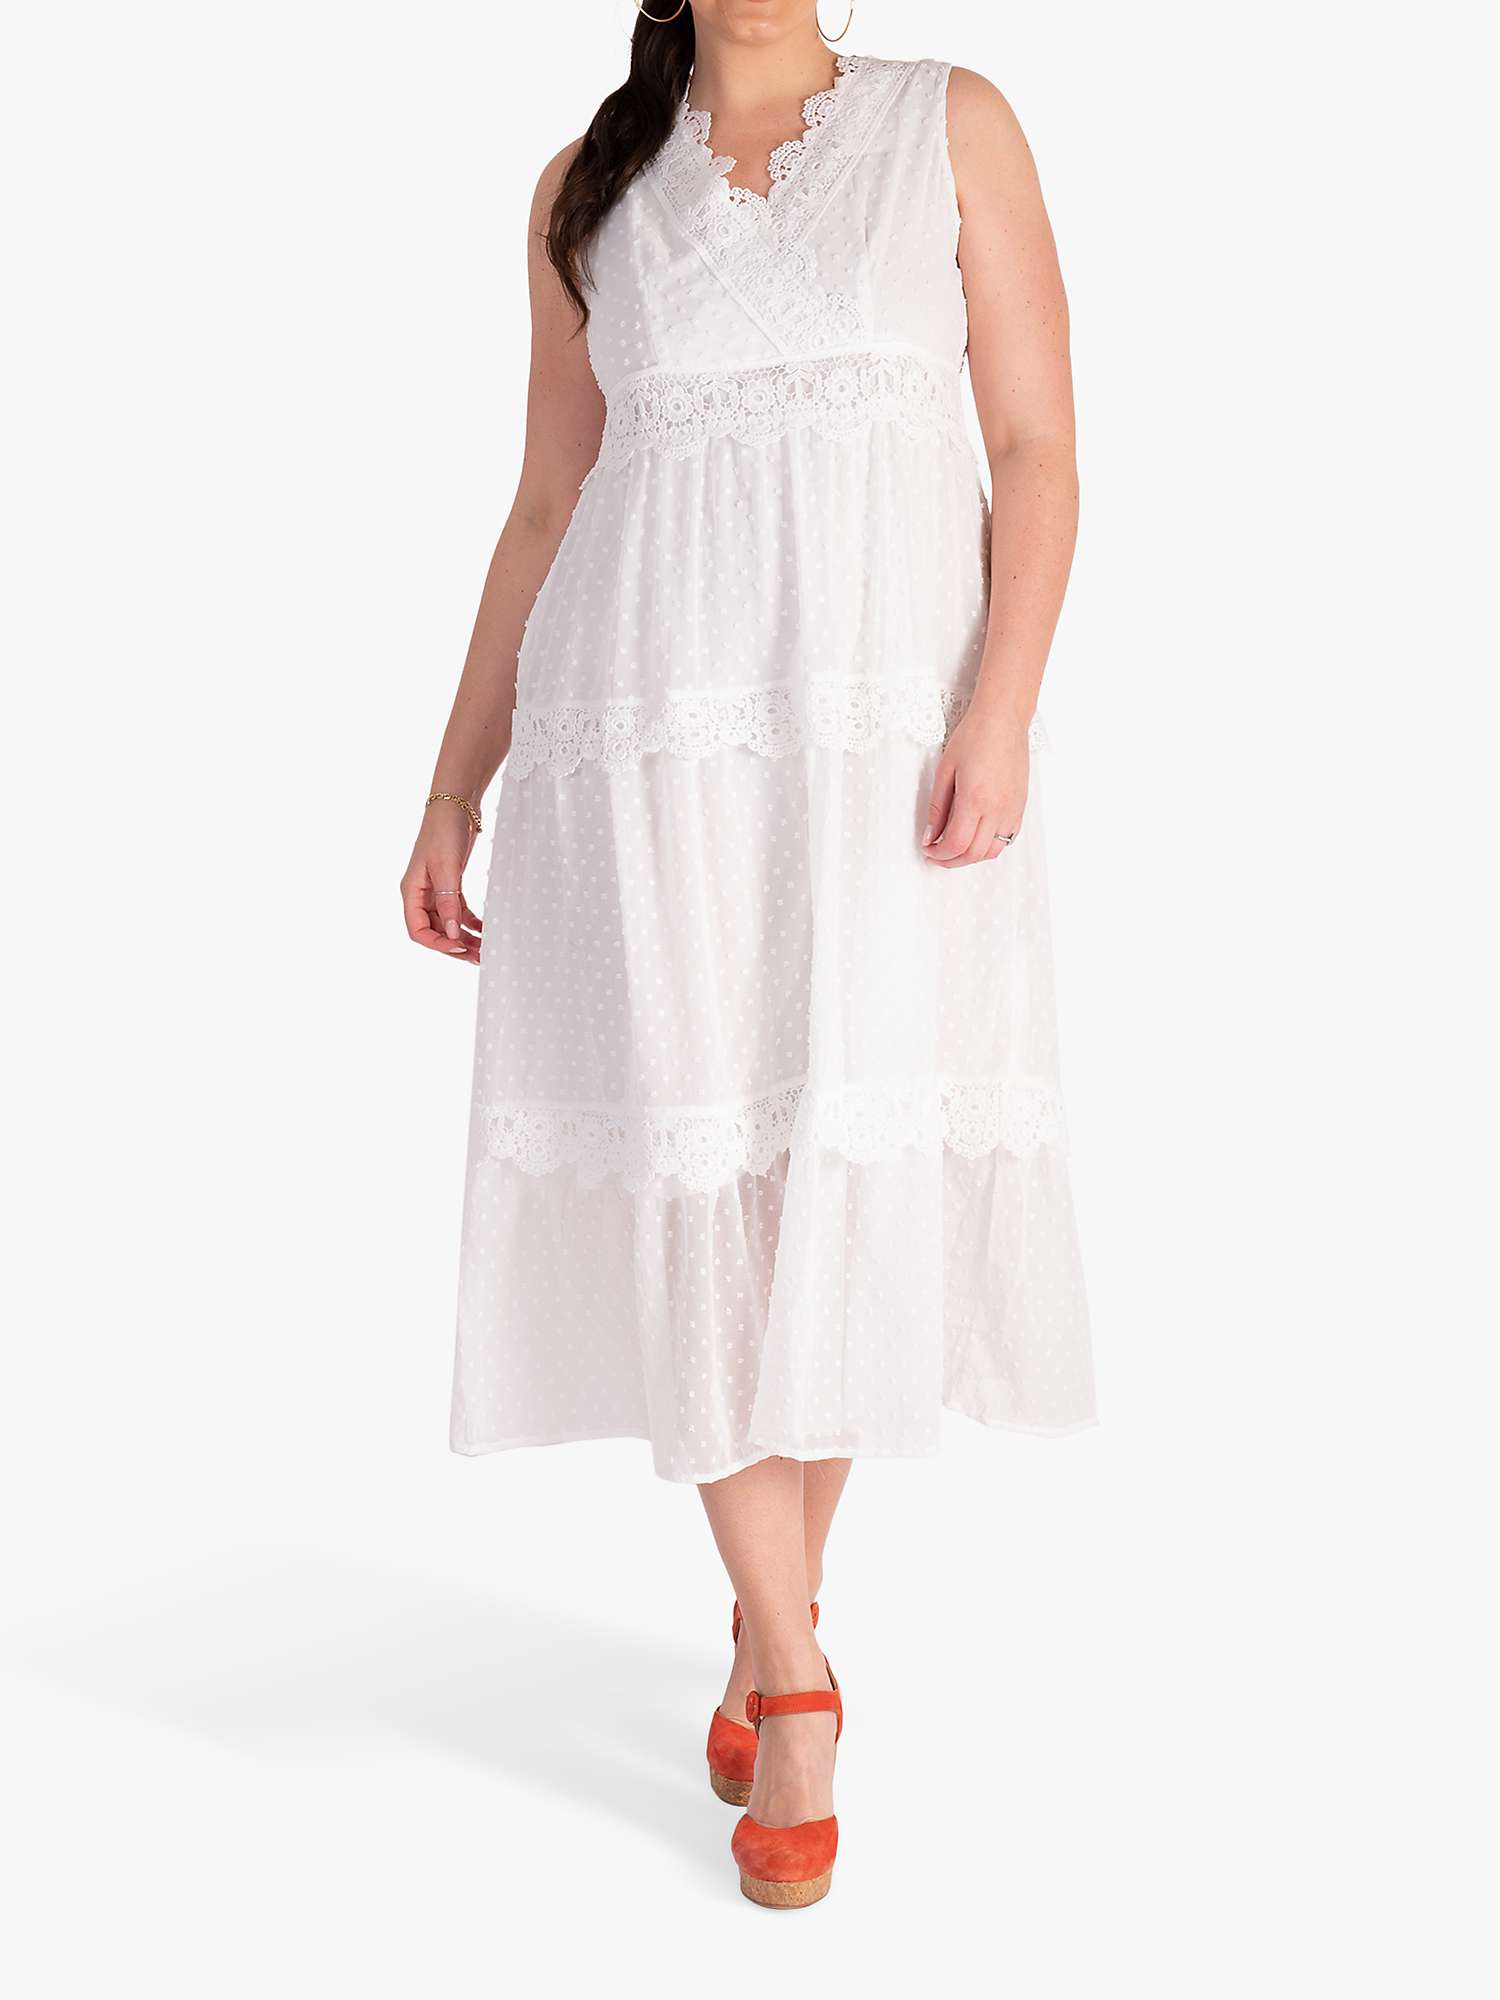 chesca Broderie Anglaise Tiered Sun Dress, White at John Lewis & Partners